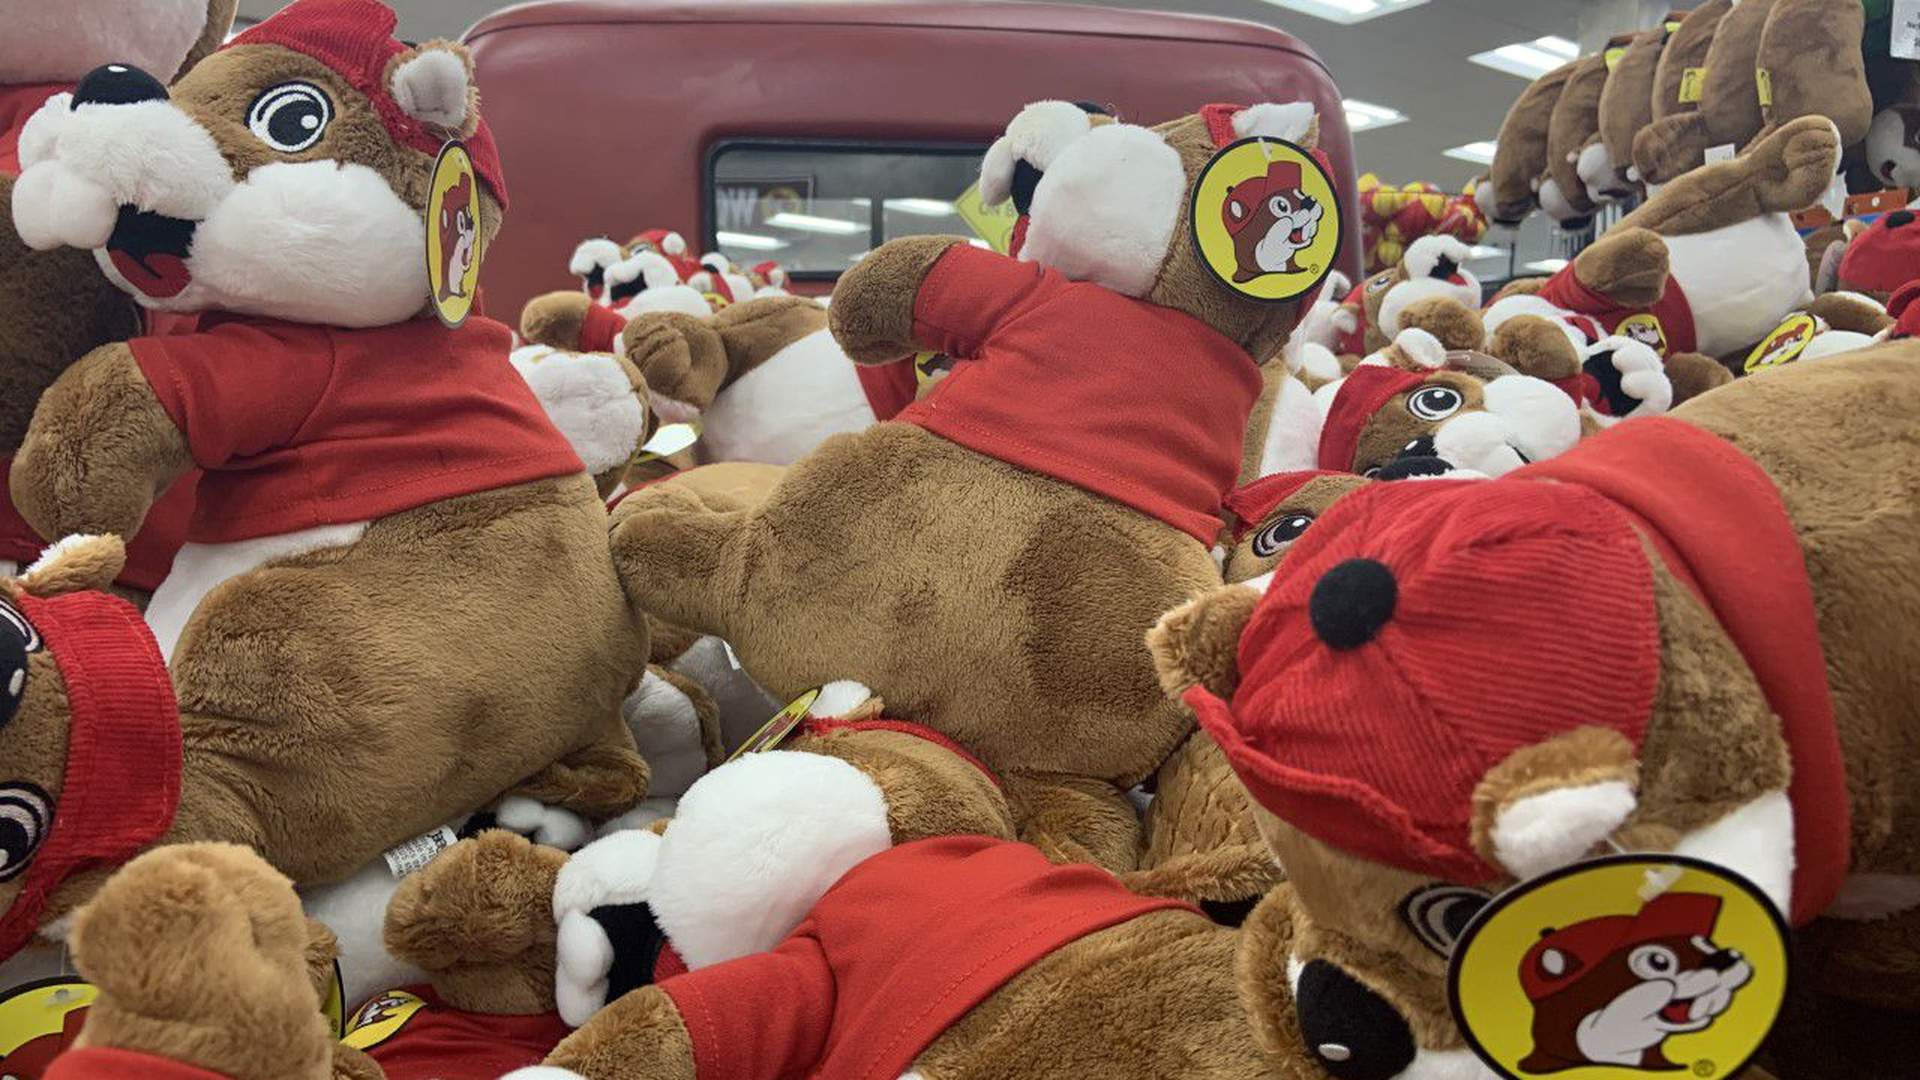 Braving crowds for Beaver nuggets: A guide for Buc-ee’s first-timers in Florida